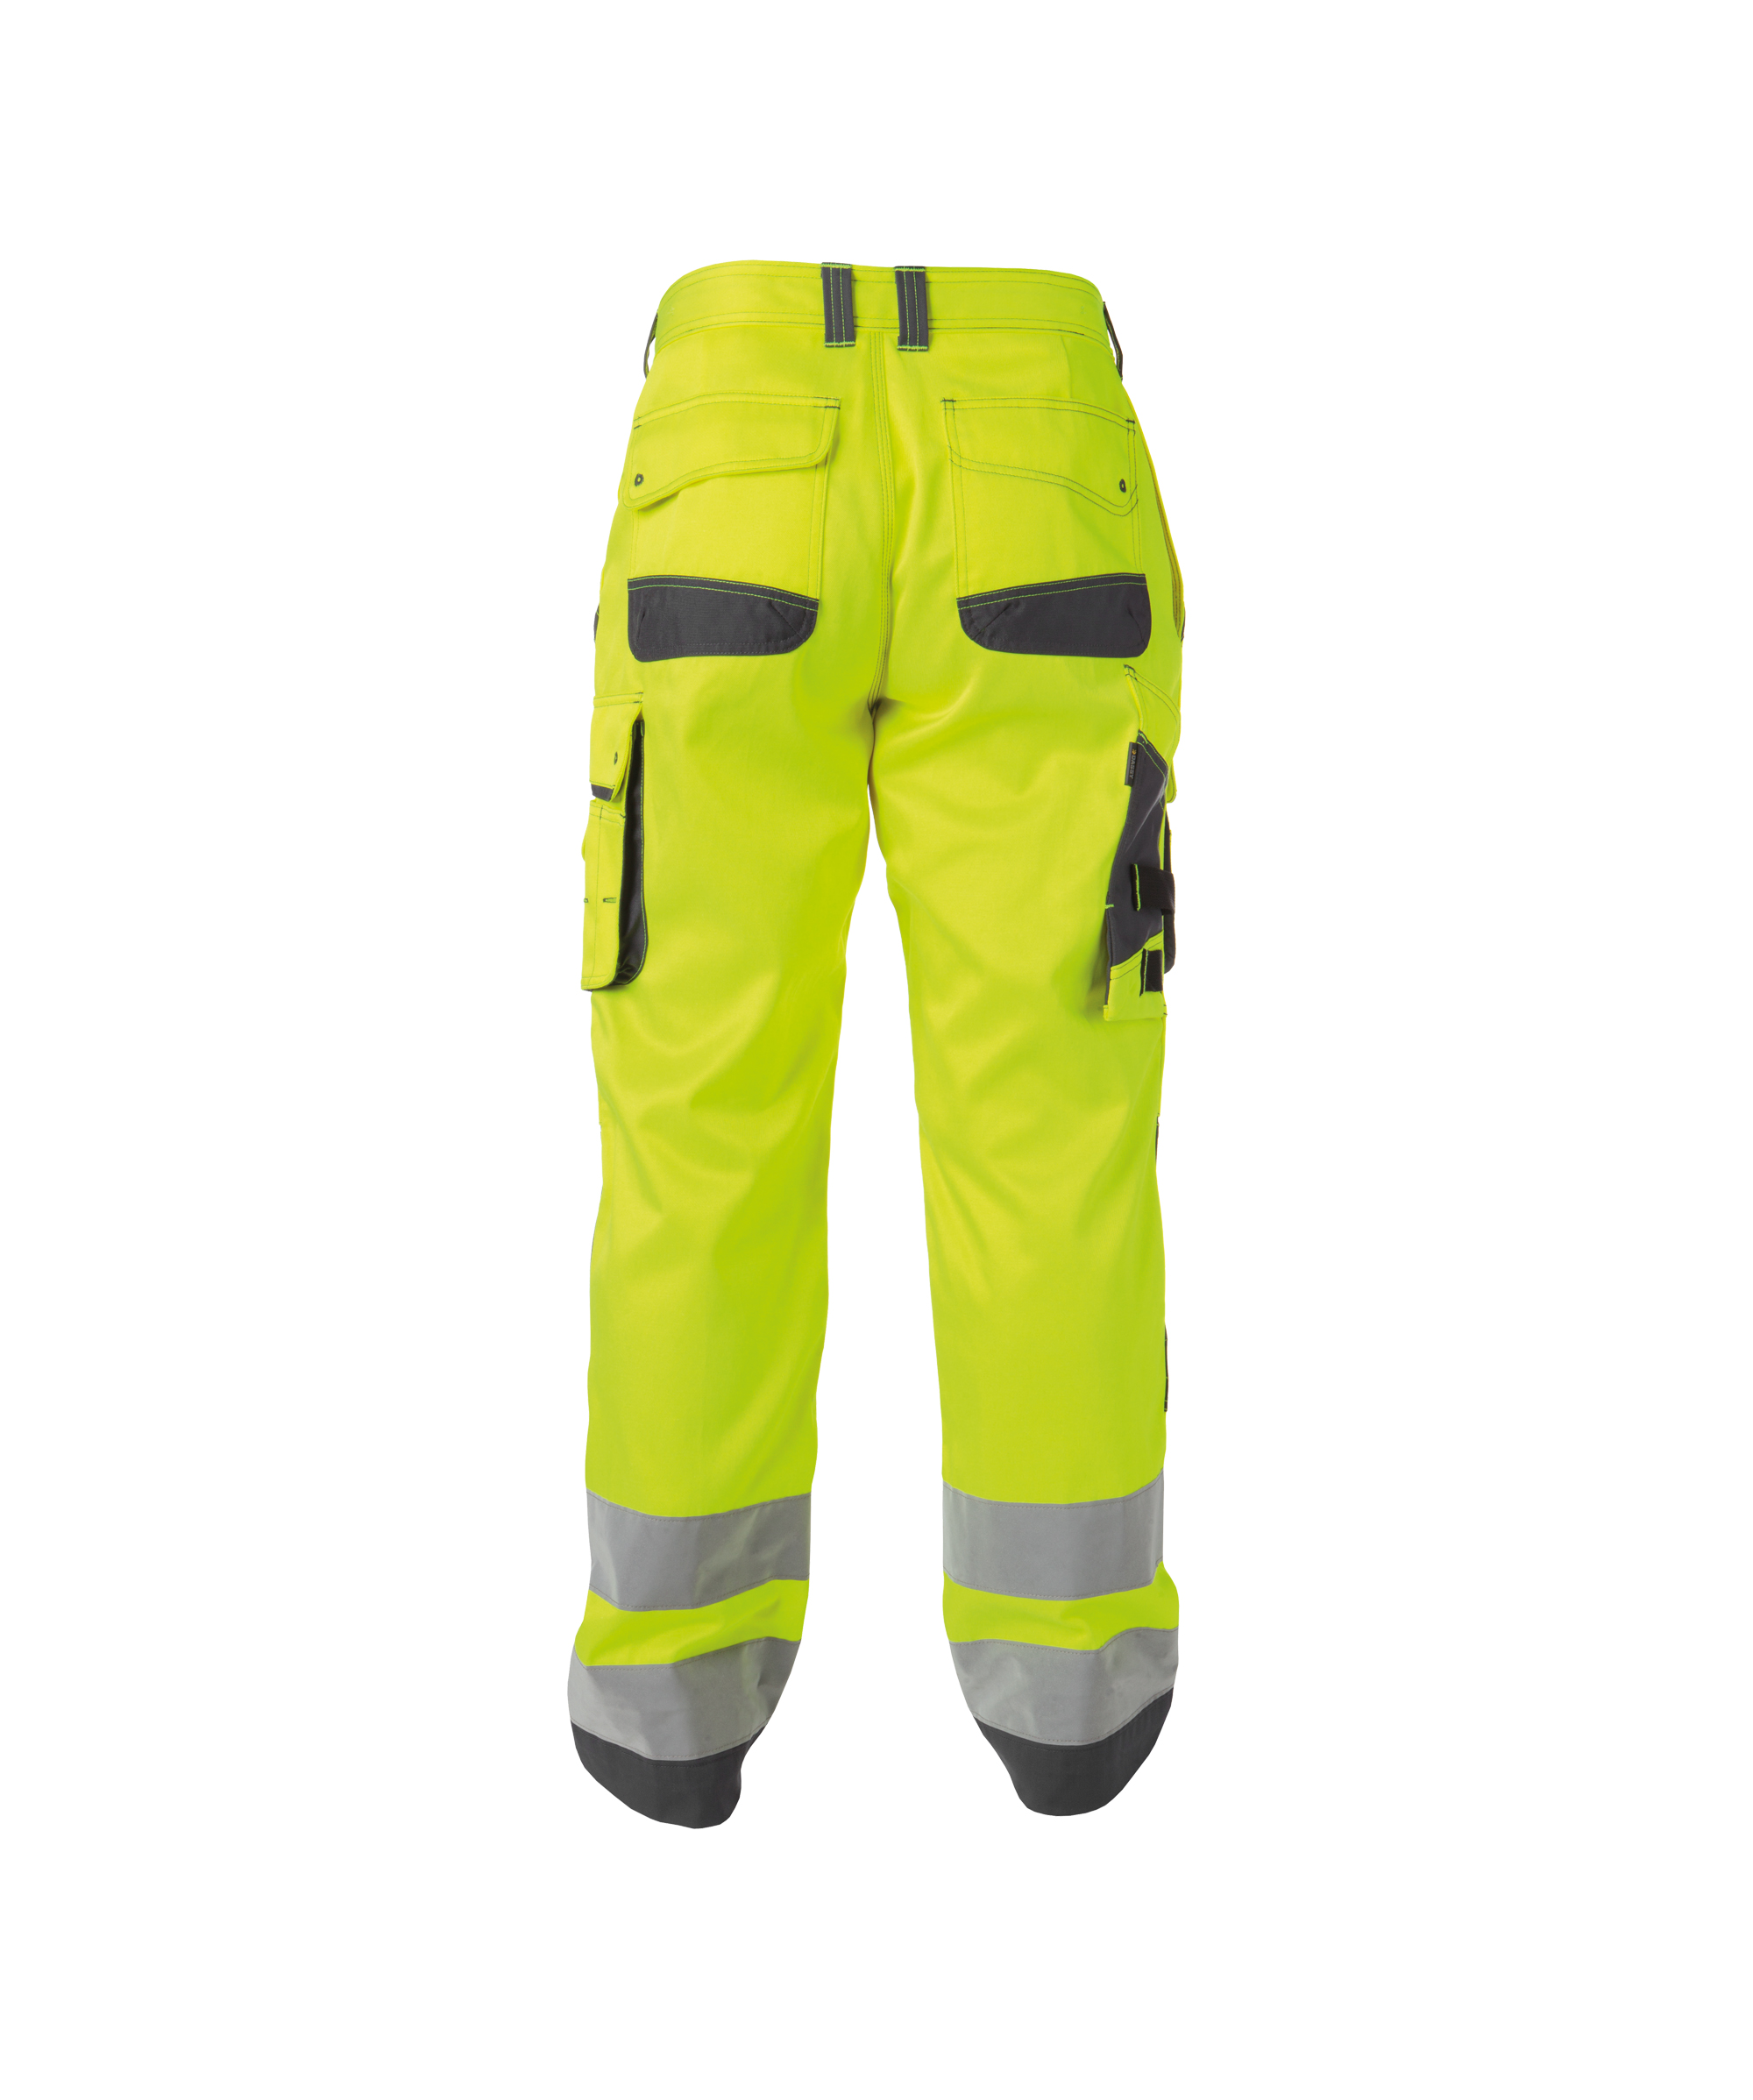 chicago_high-visibility-work-trousers-with-knee-pockets_fluo-yellow-cement-grey_back.jpg